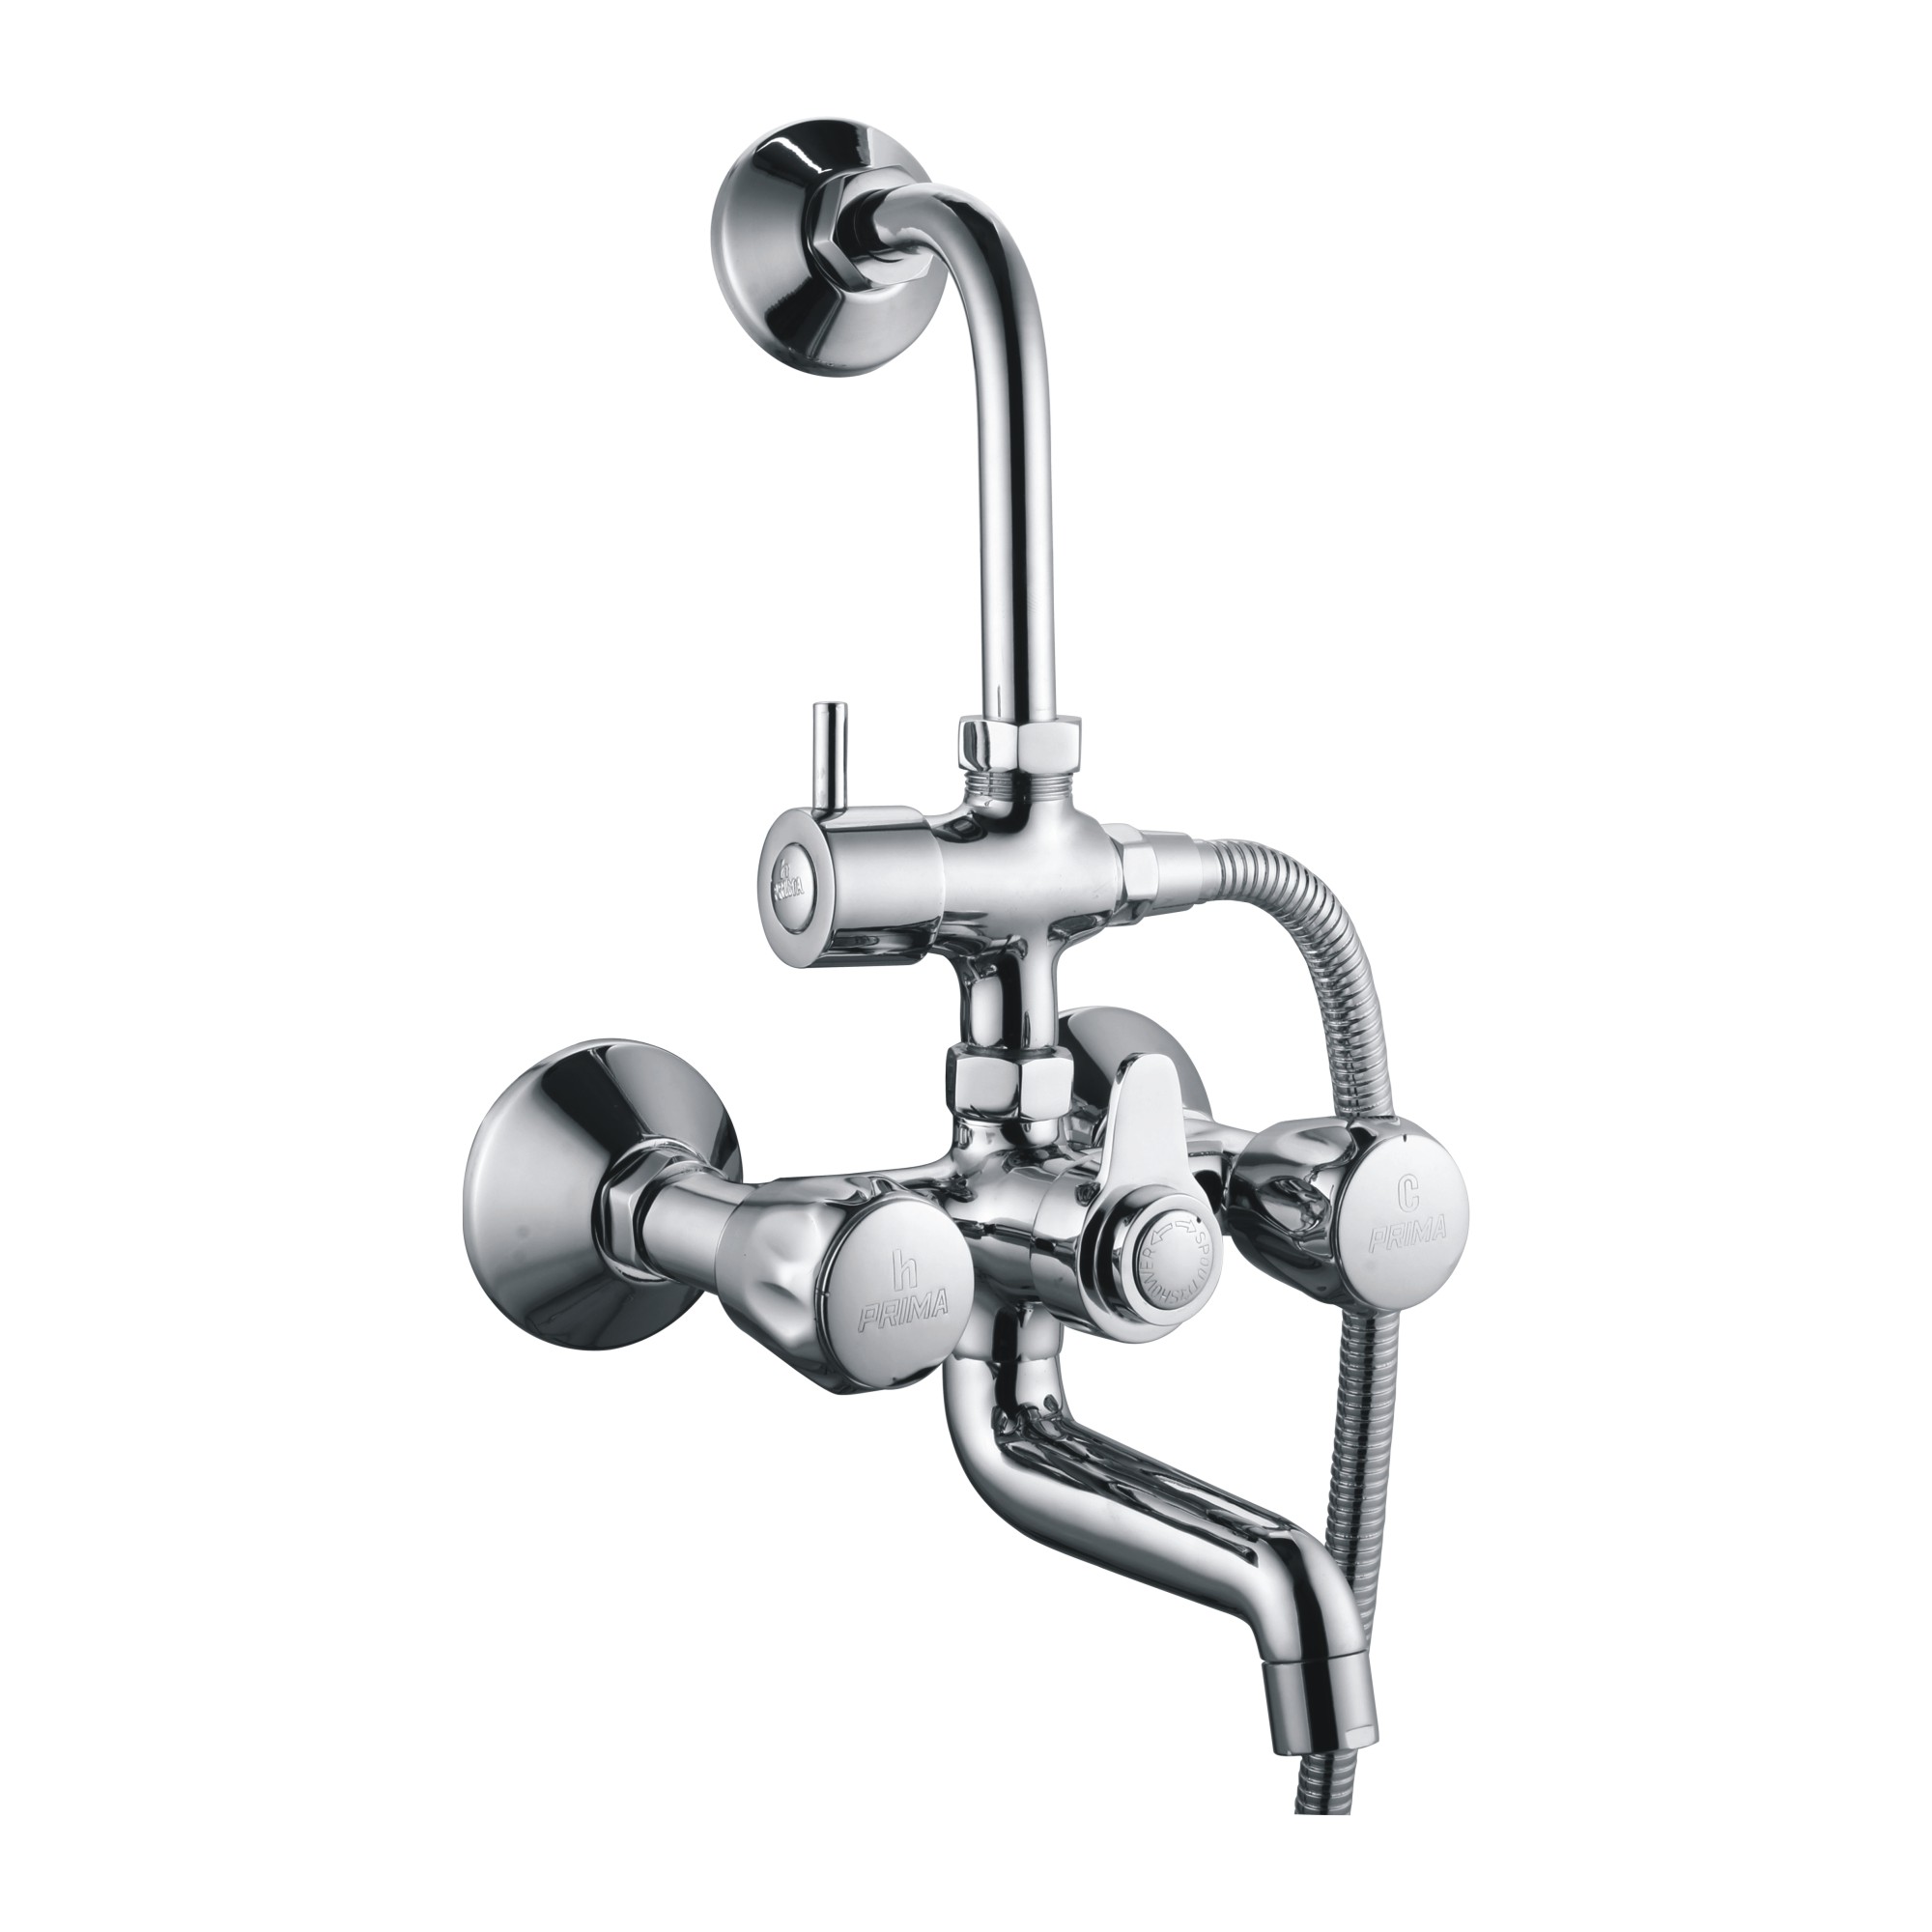 C.P Wall Mixer 3 in 1 System With Bend Set Tele